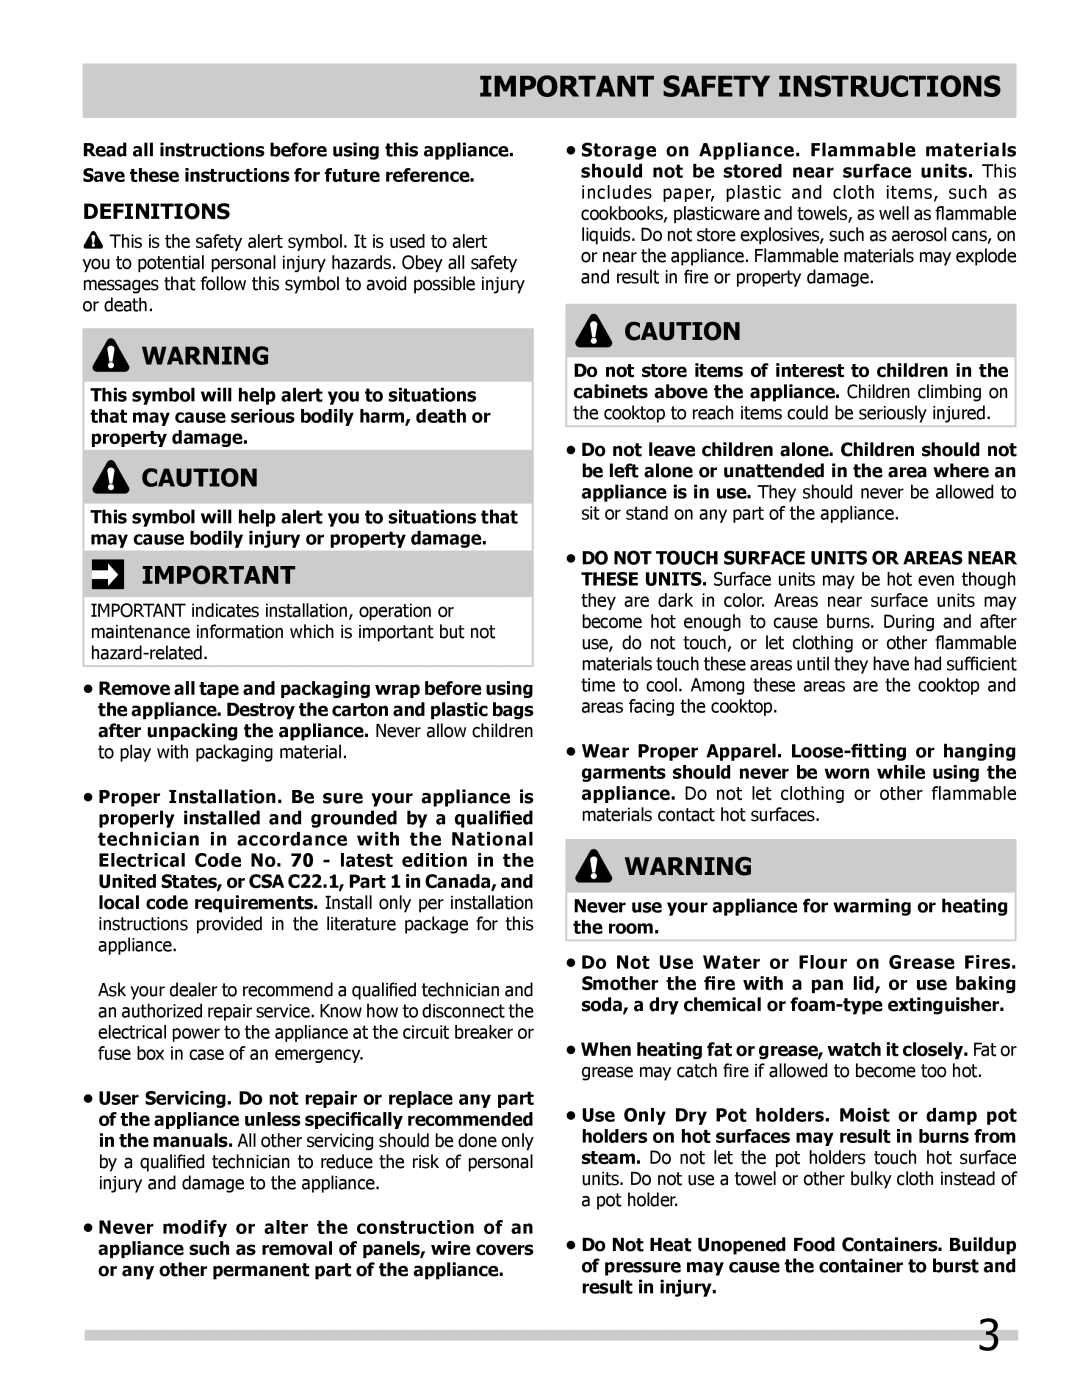 Frigidaire FFEC3005LW, FFEC3024LW, FFEC3024LB, FFEC3025LB, FFEC2605LW, FFEC3005LB Important Safety Instructions, Definitions 